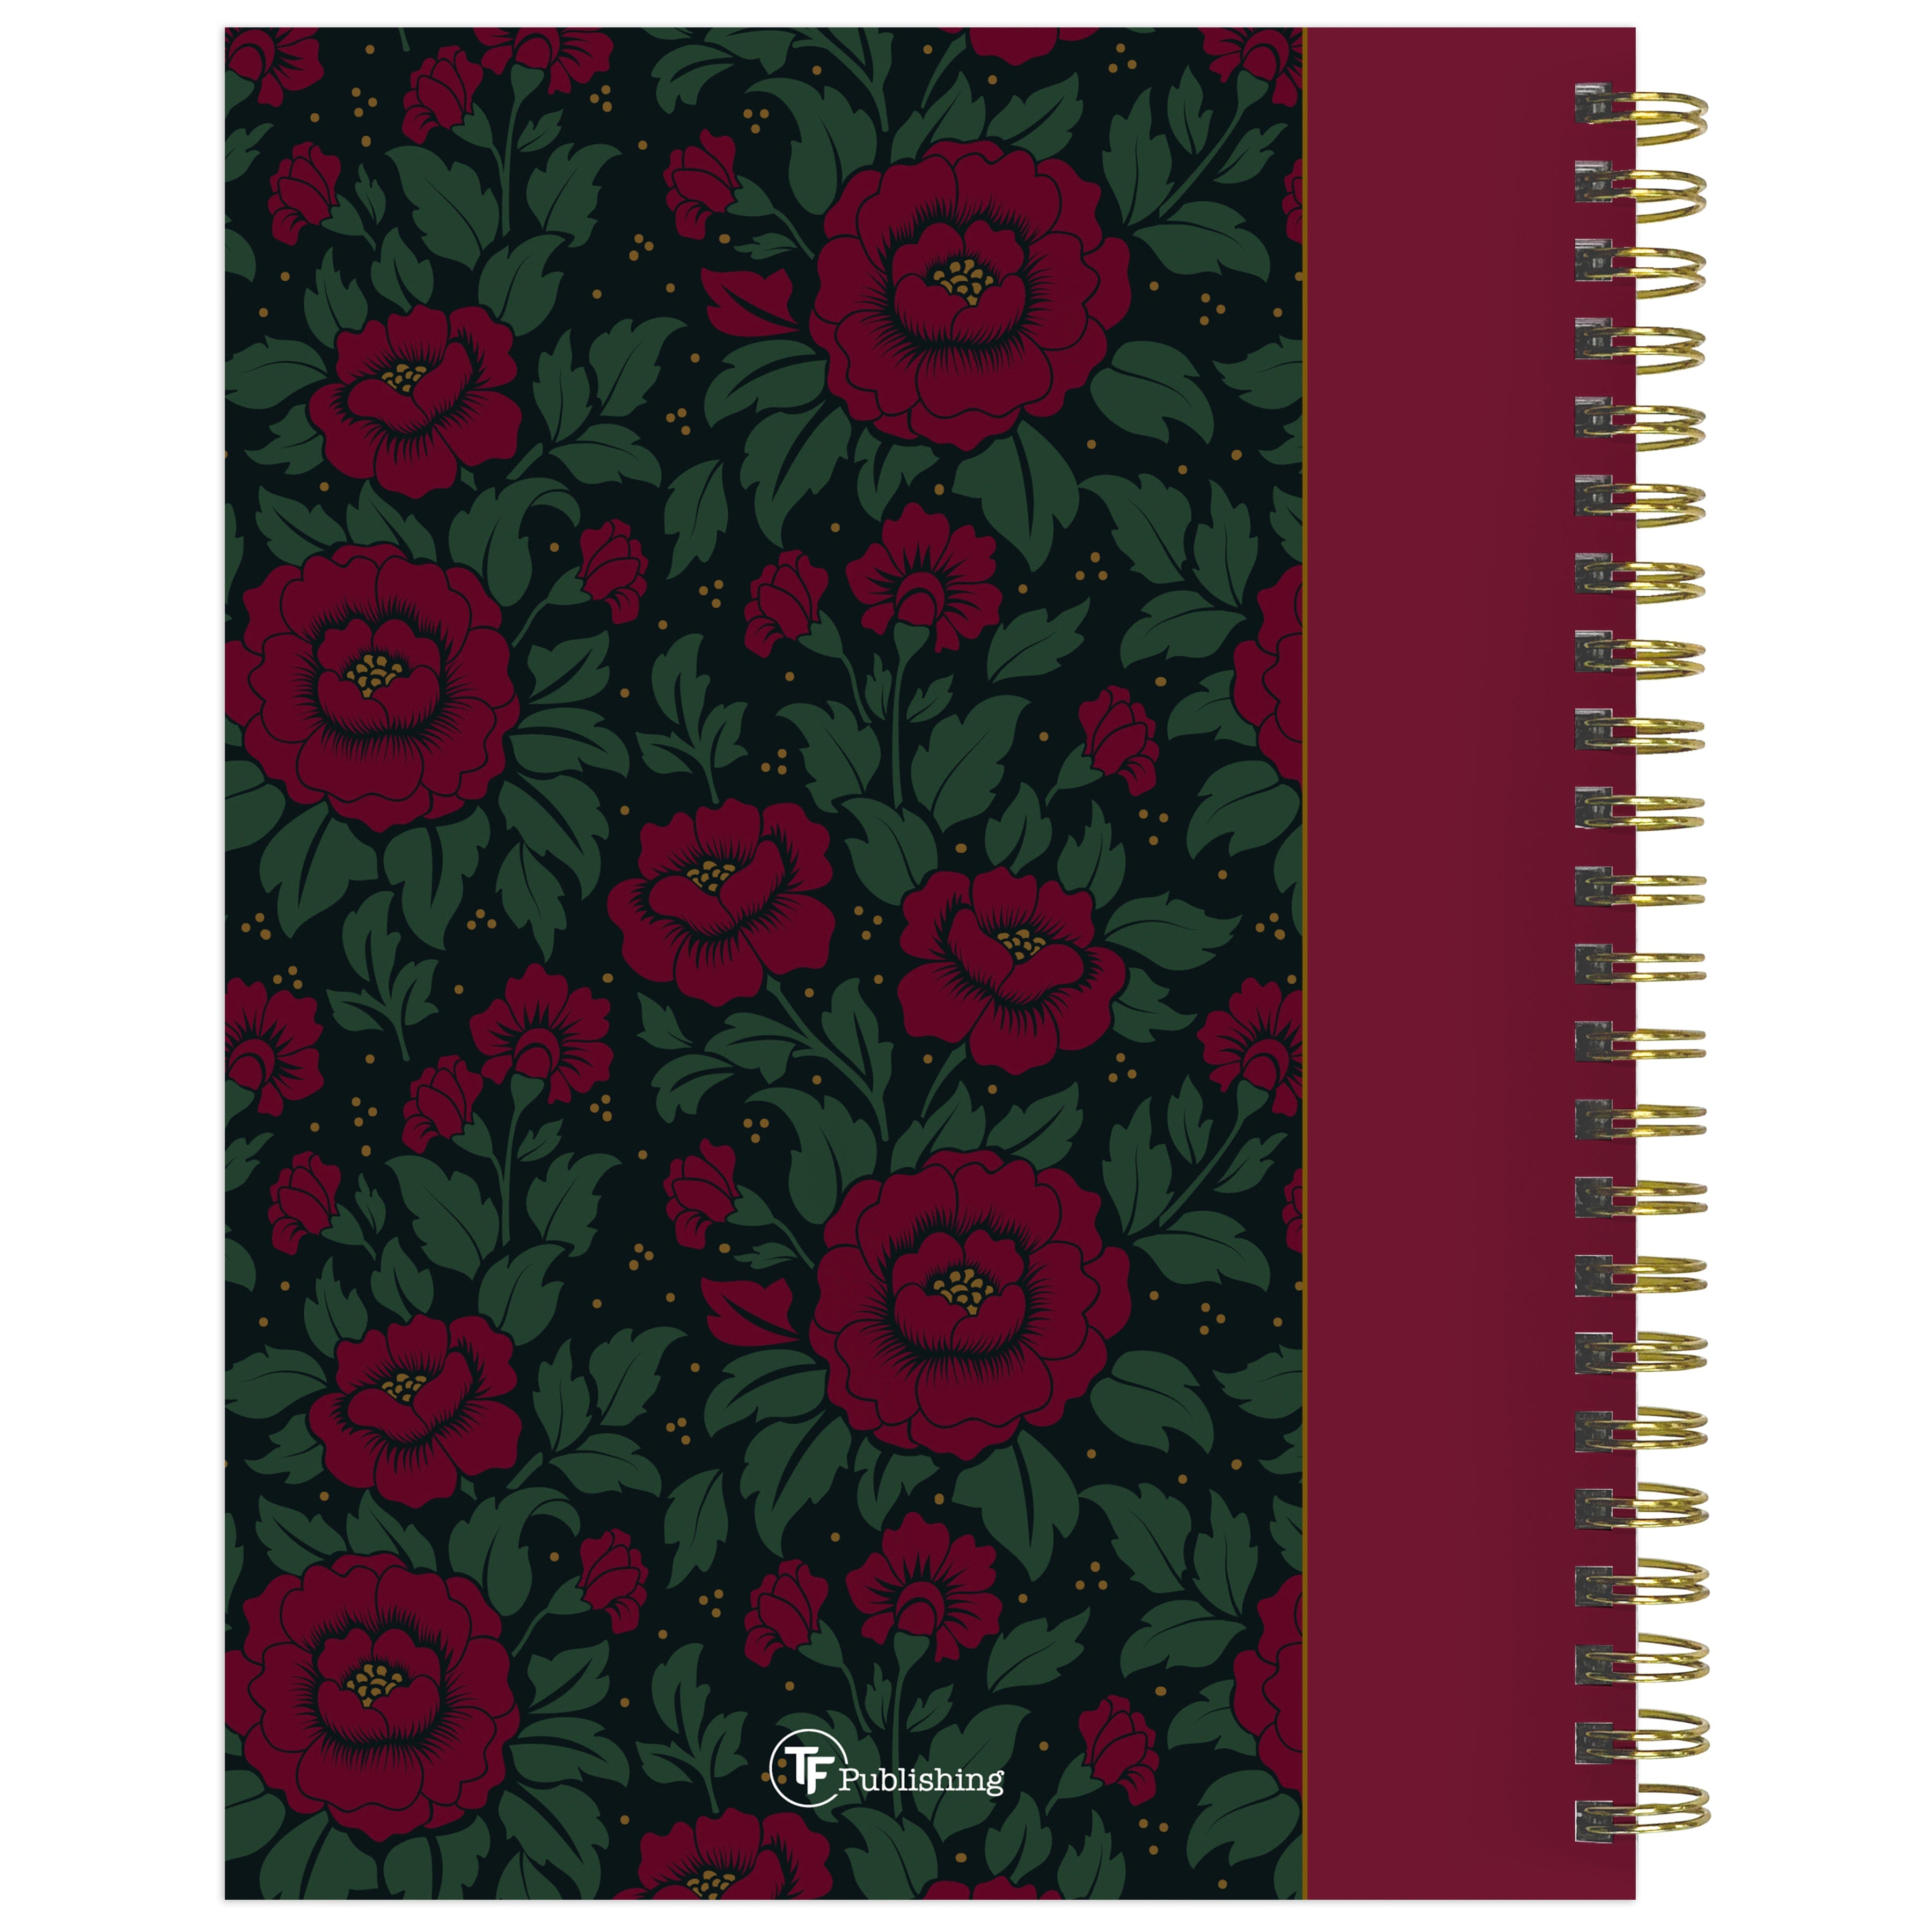 2025 Victorian Blooms - Medium Monthly & Weekly Diary/Planner